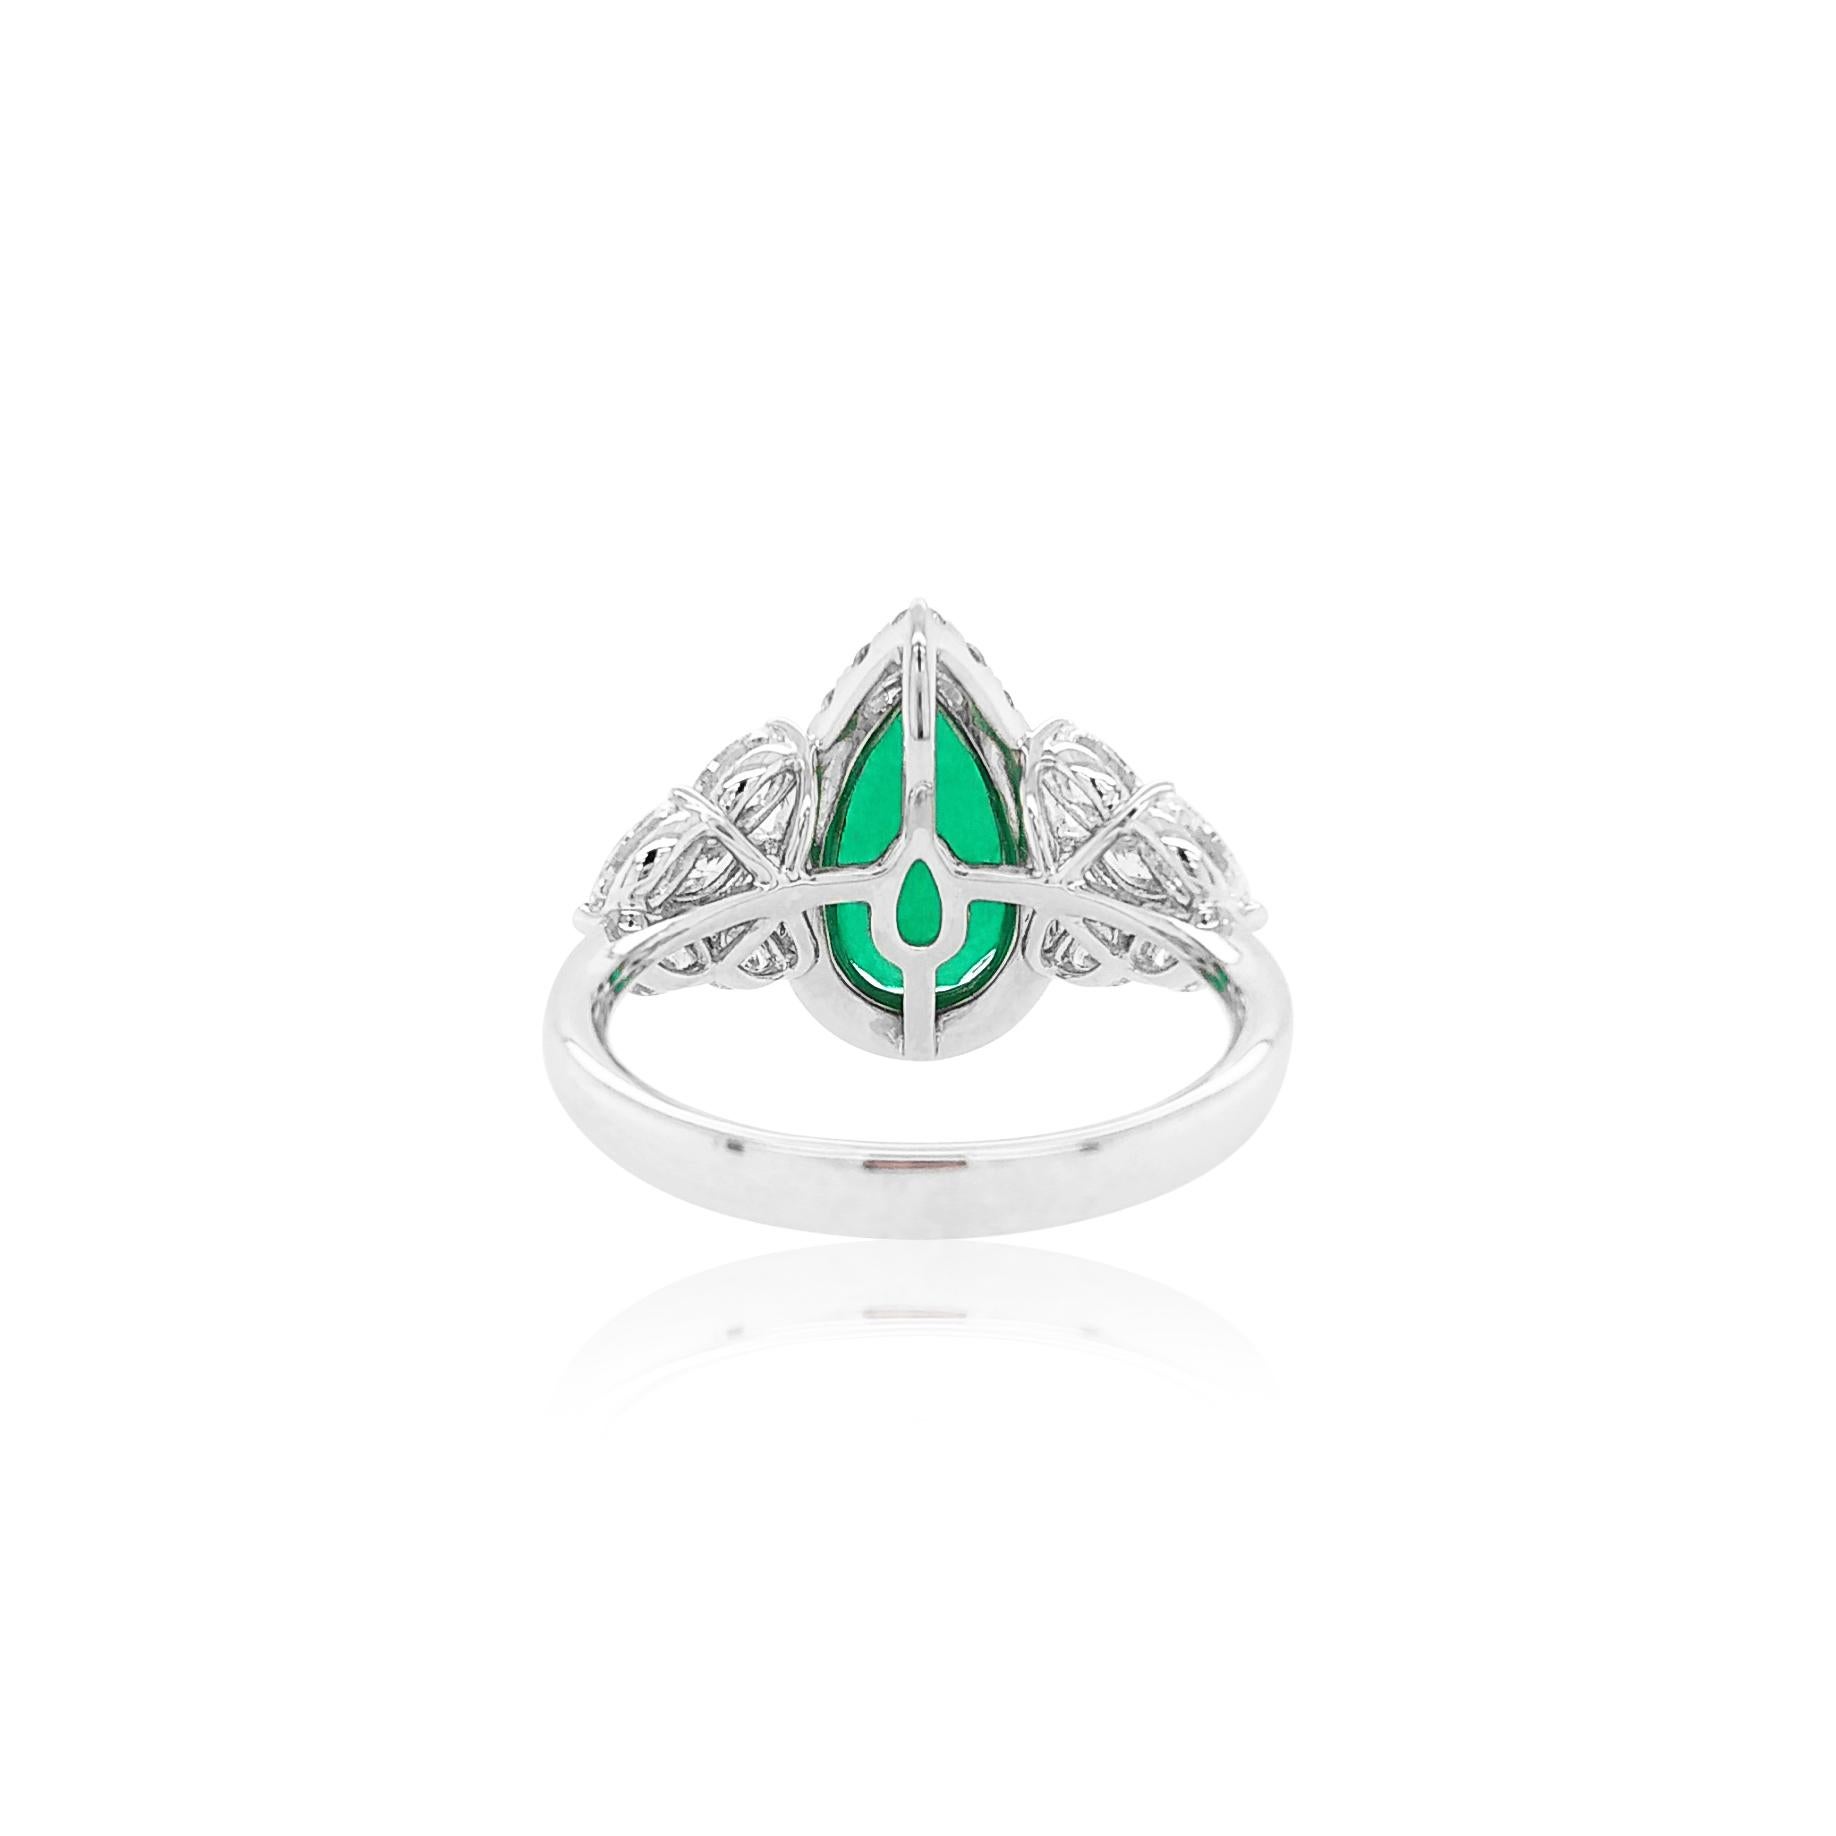 This mesmeric ring features one of their exceptional, a GRS certified Pear-shape natural Colombian Emerald at its centre. The incredibly rare emerald is perfectly accentuated by a halo of white diamonds surrounding it, and the sparkling